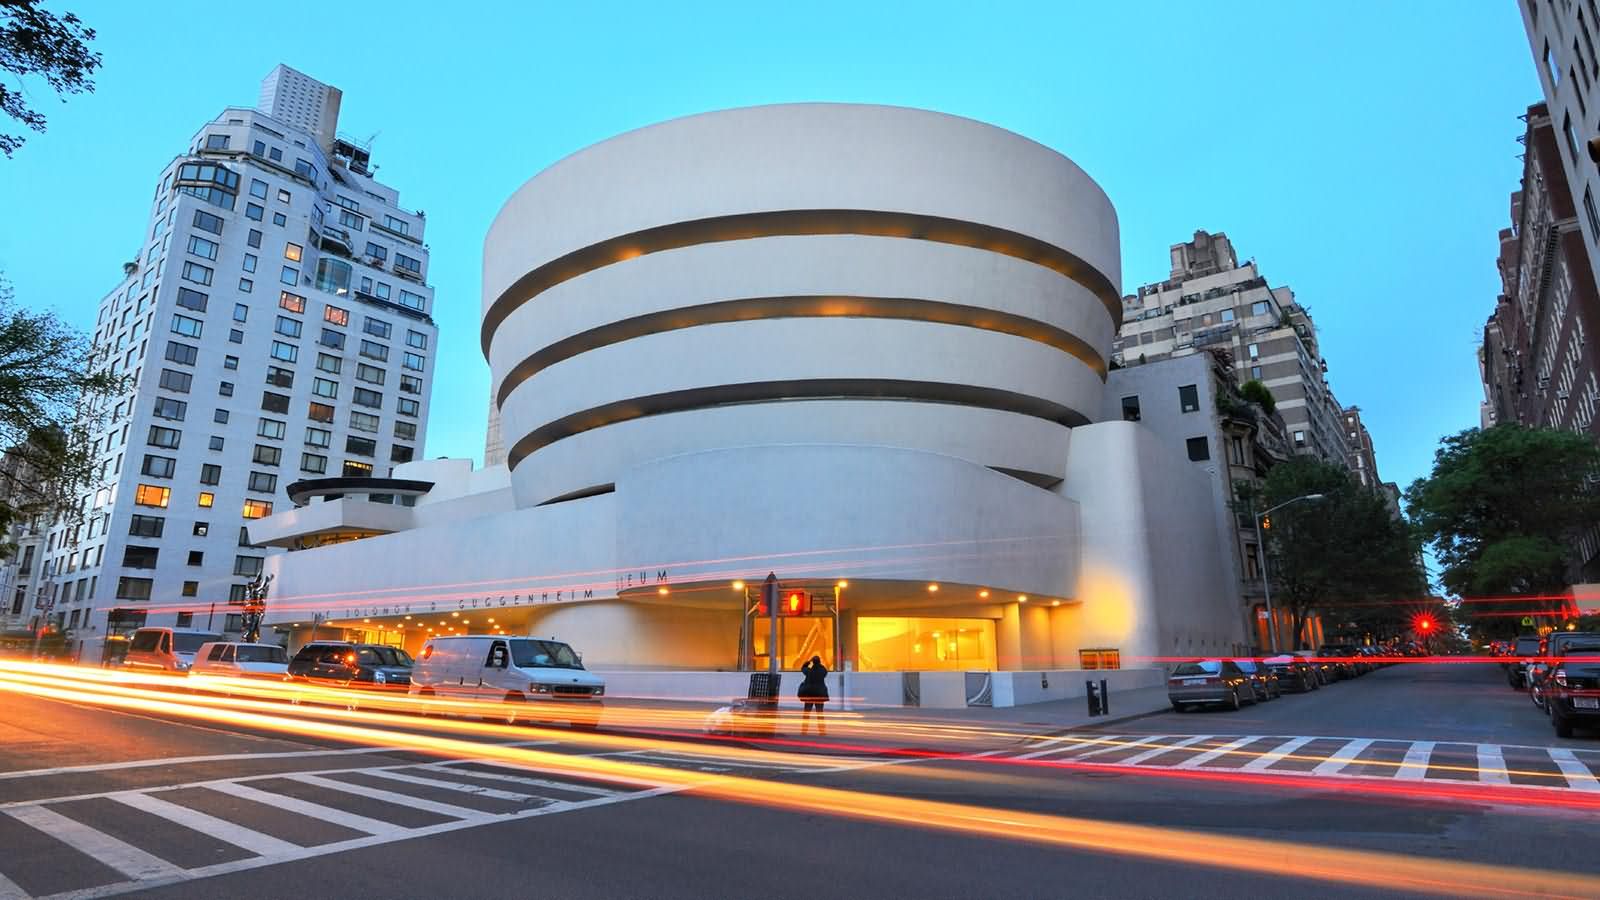 Guggenheim Museum With Motion Lights At Dusk